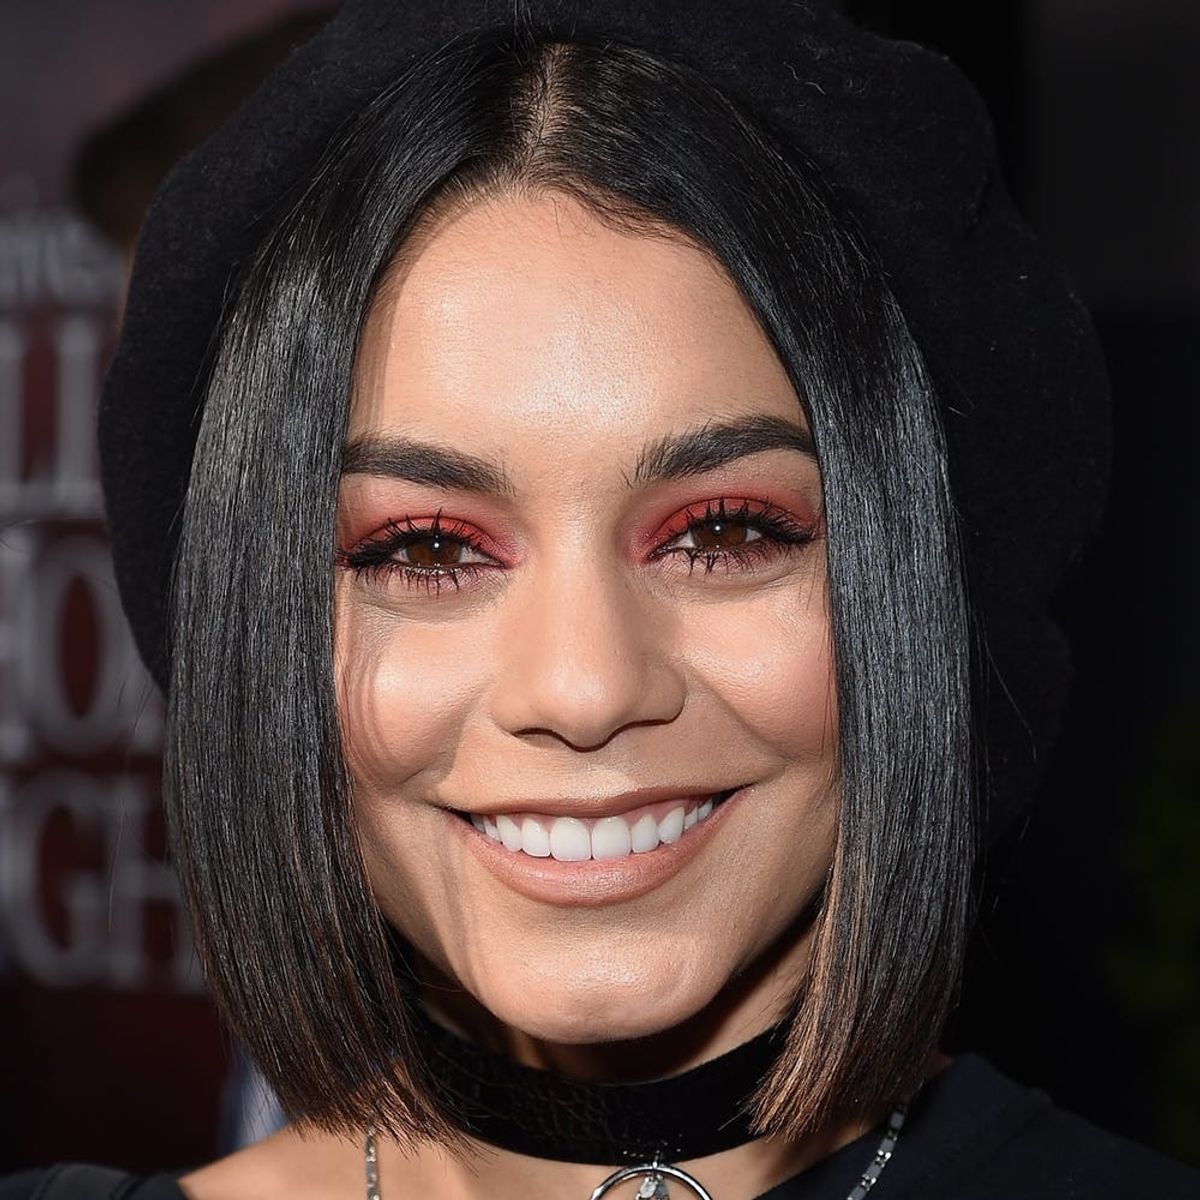 Vanessa Hudgens Just Gave Us Major Halloween Inspo With Her DIY Look from “The Craft”